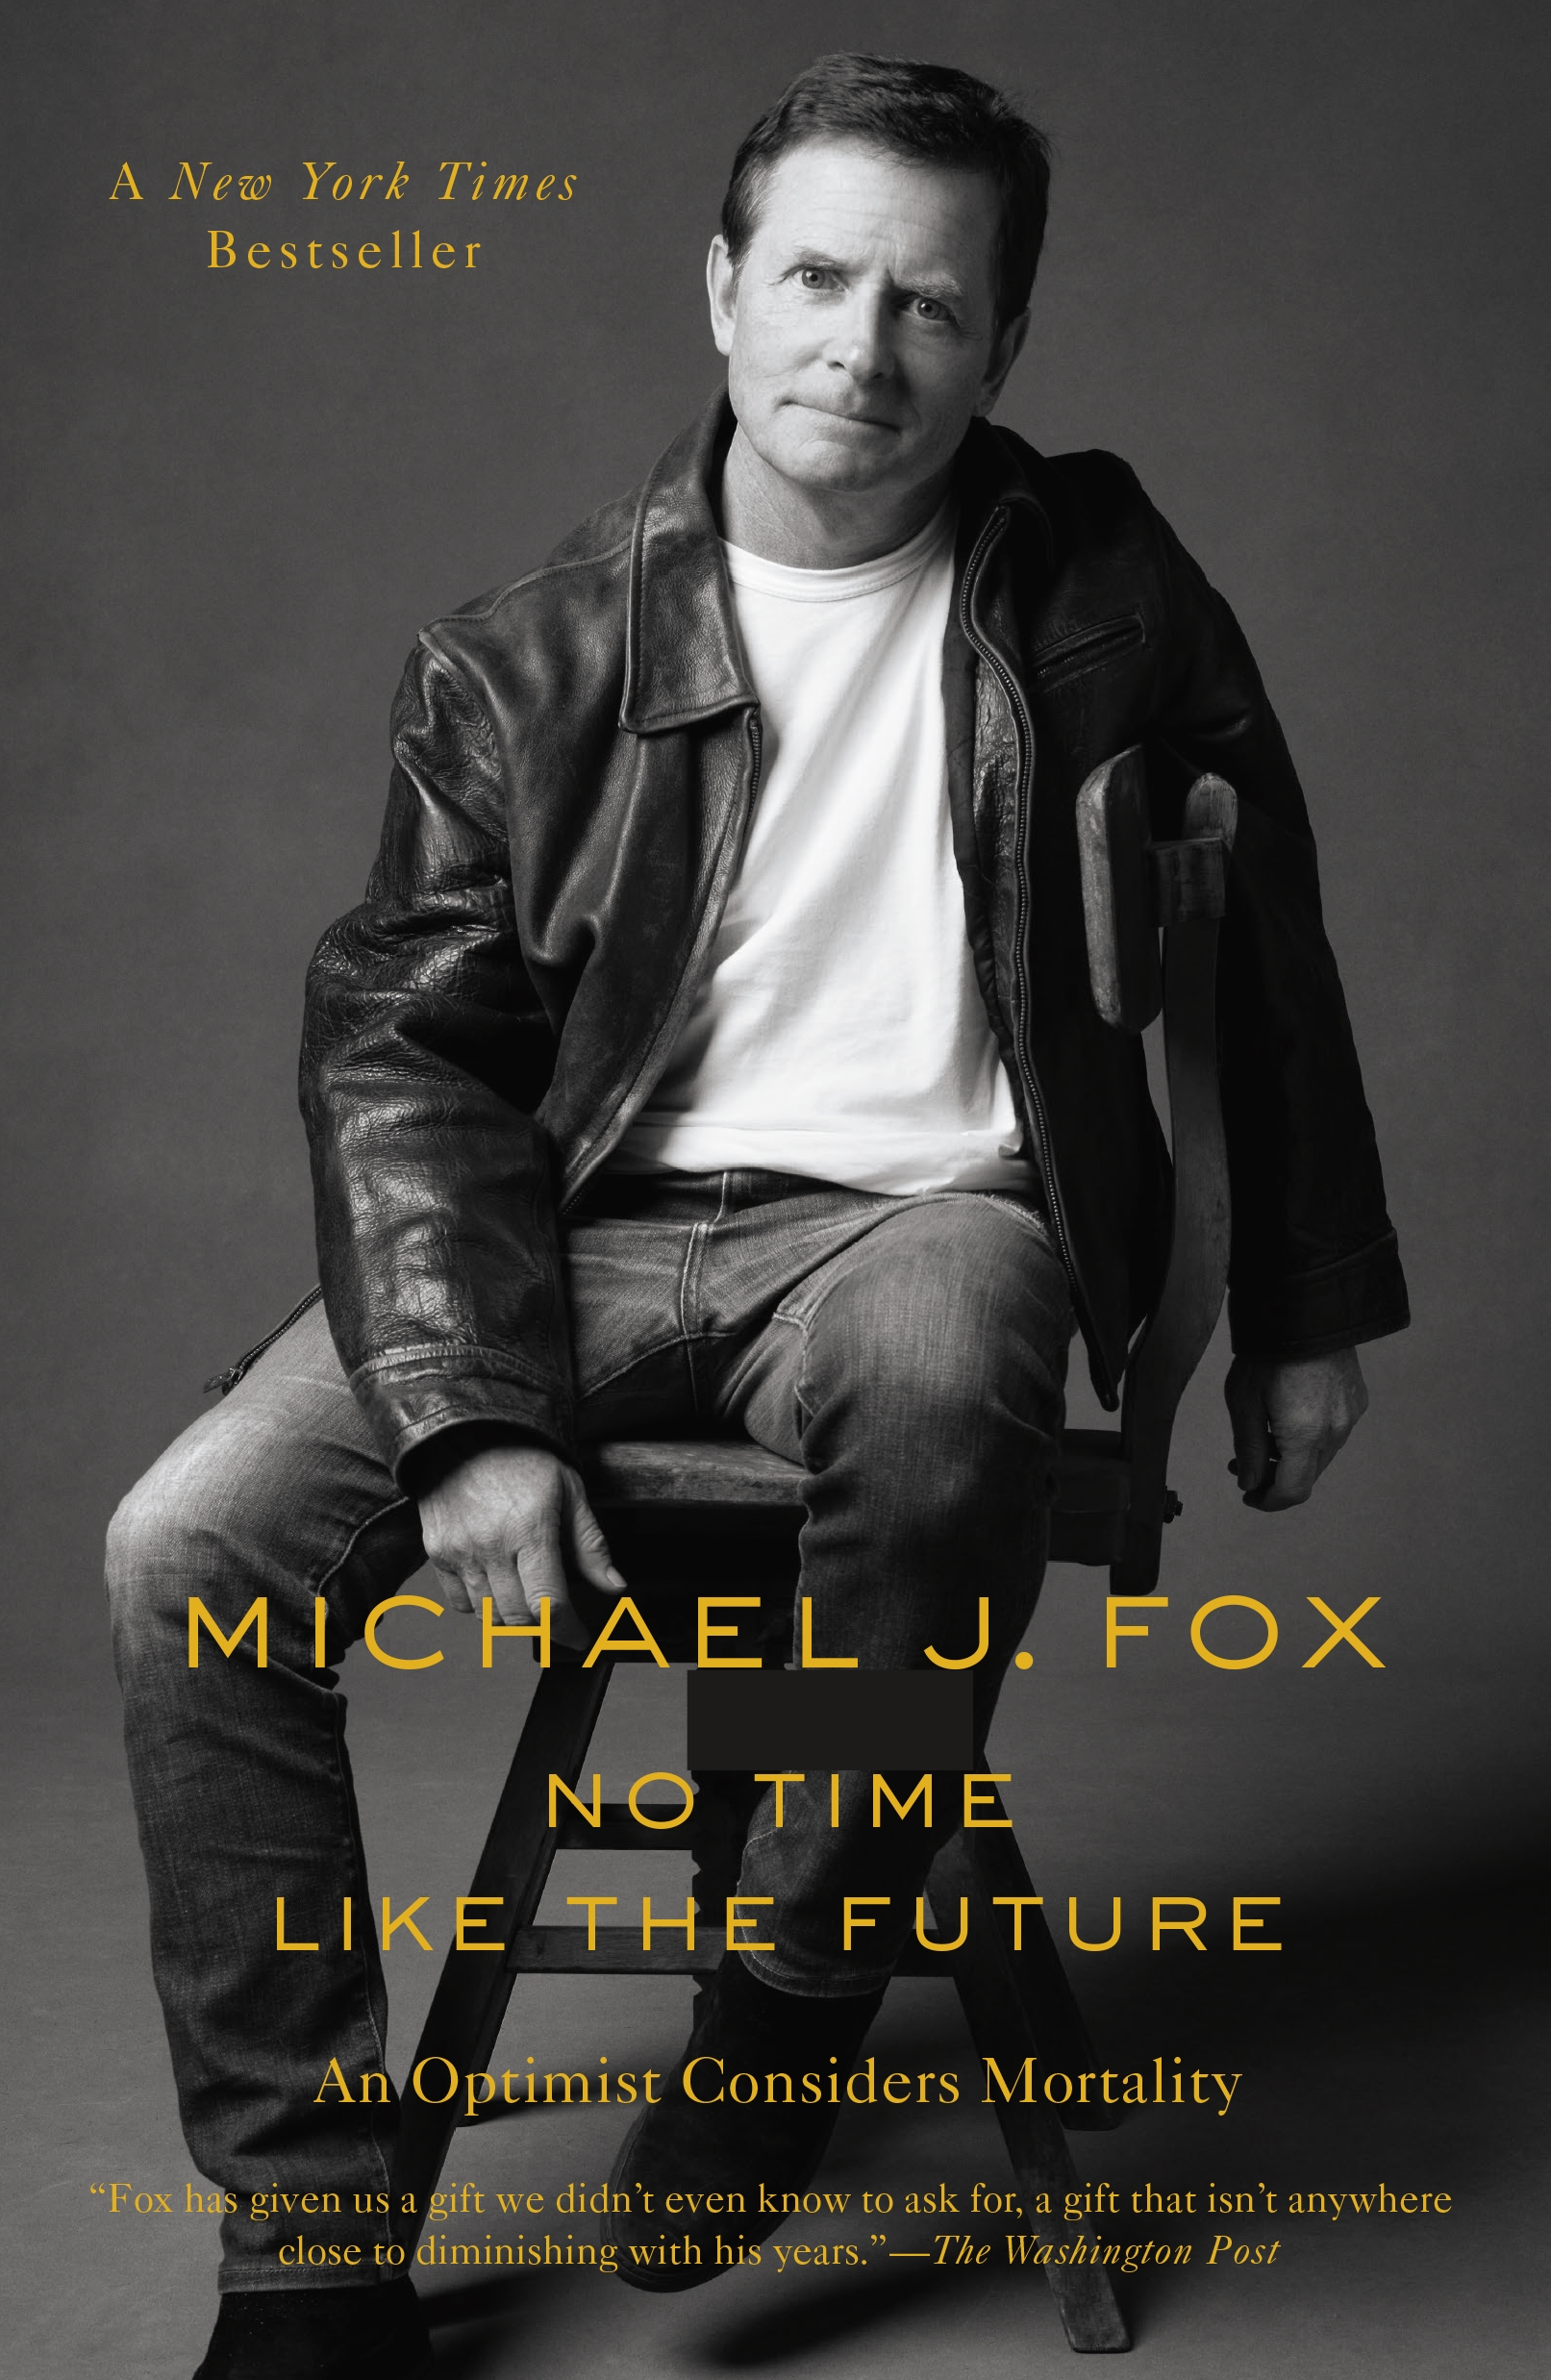 Virtual event with Michael J. Fox/No Time Like the Future